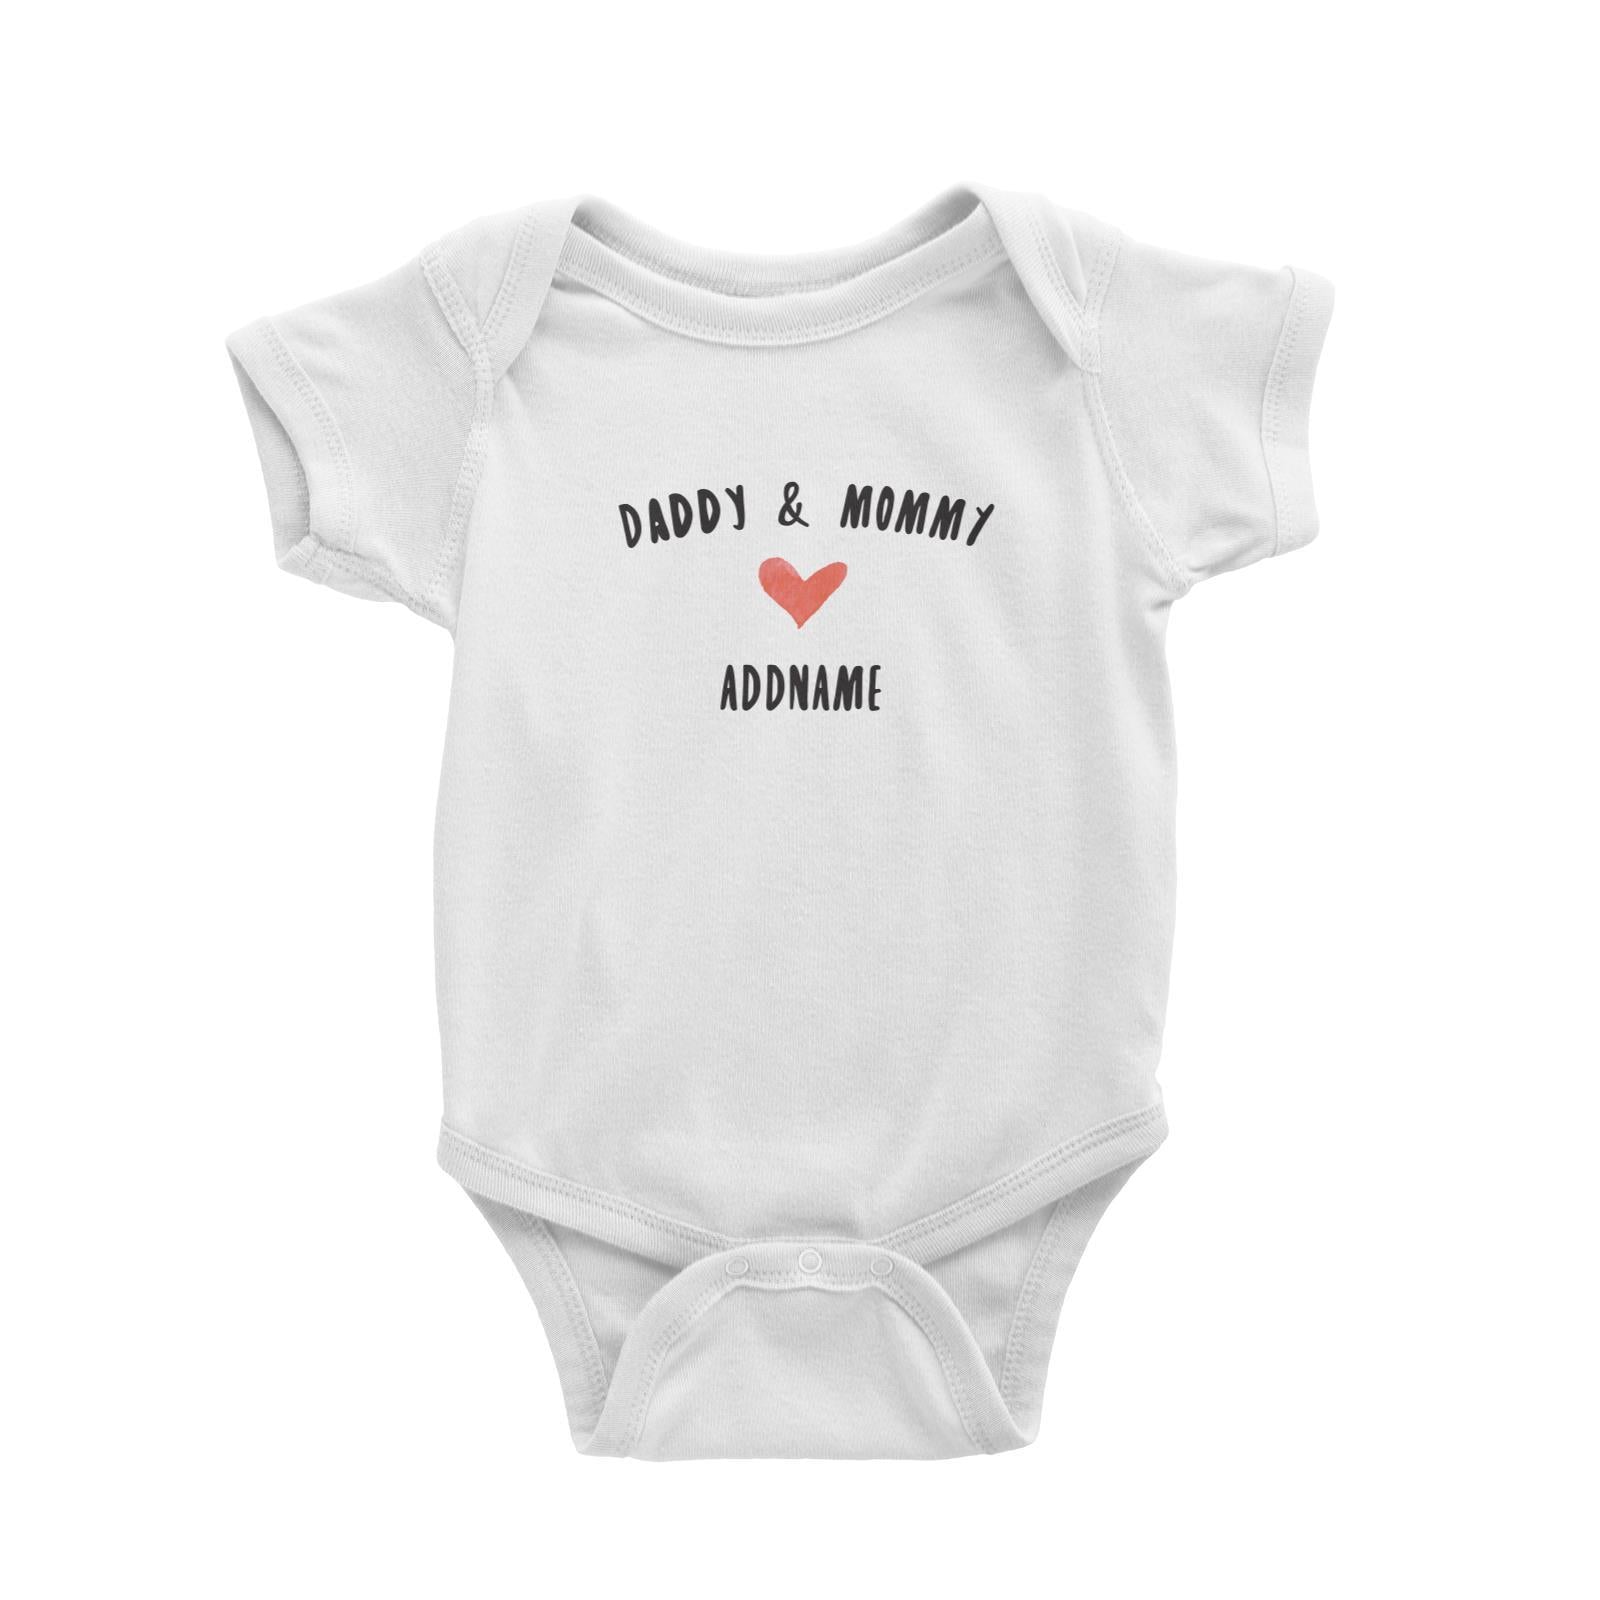 Daddy & Mommy Love Addname Baby Romper  Matching Family Personalizable Designs